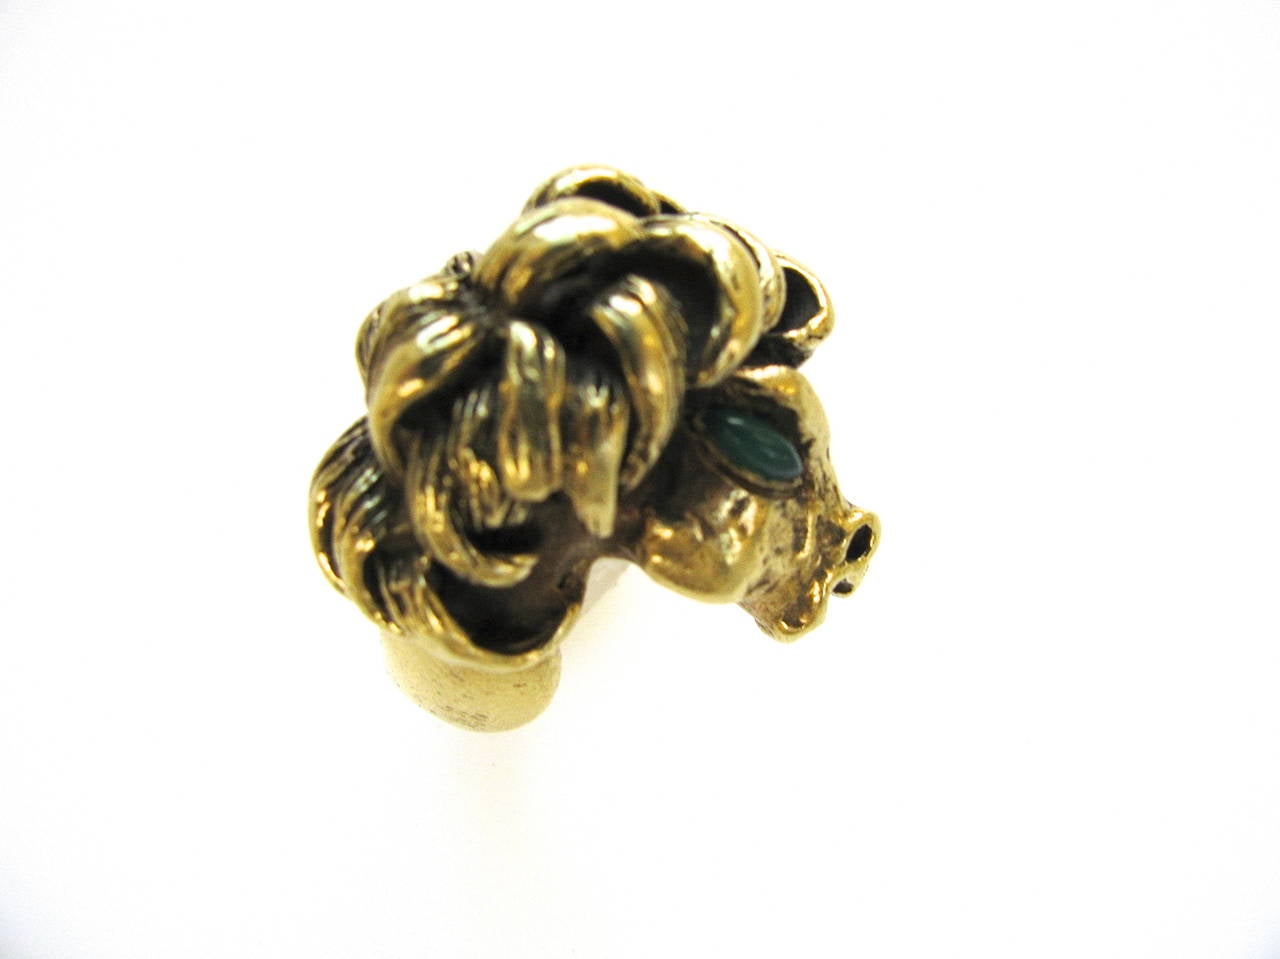 A sculptural gold horse ring. The 7/8